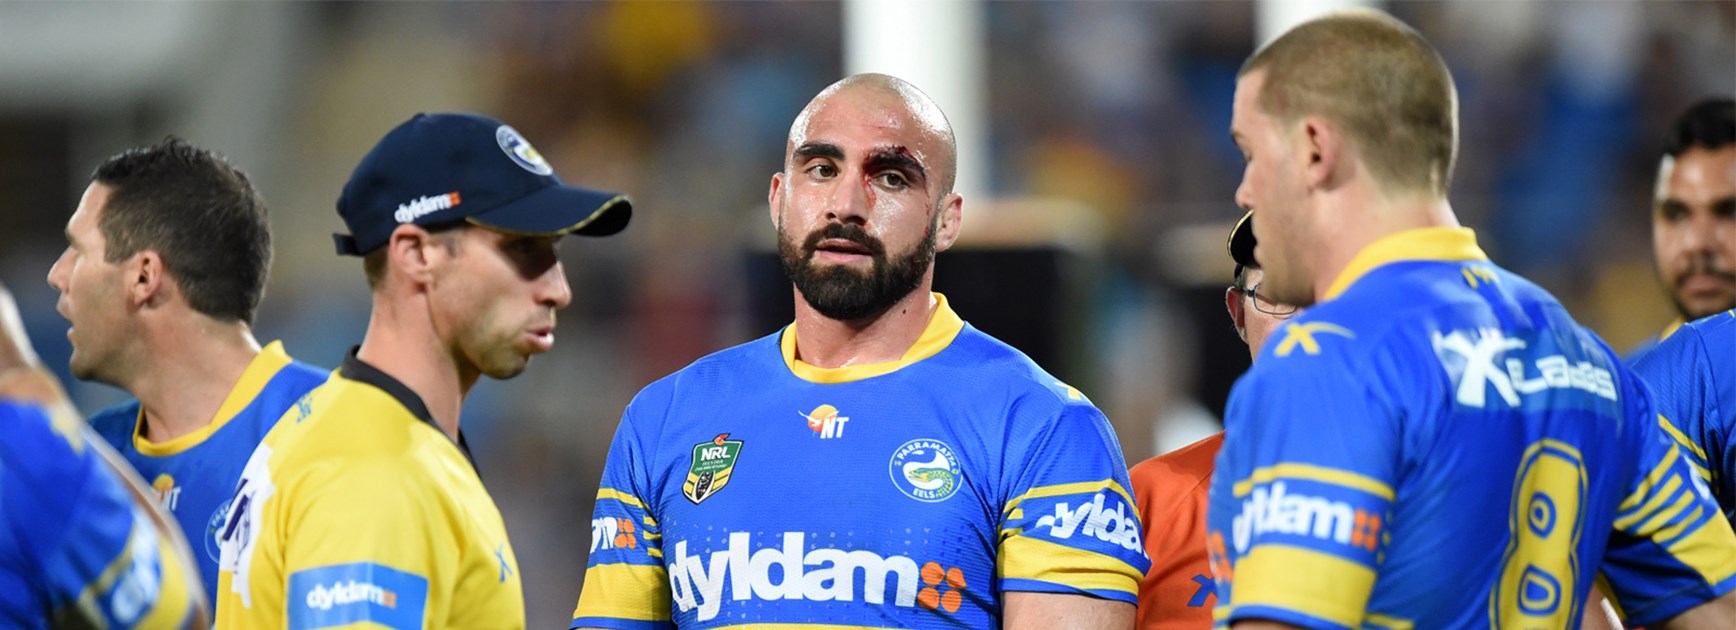 Eels props Tim Mannah and Danny Wicks during their team's loss to the Titans on Saturday.